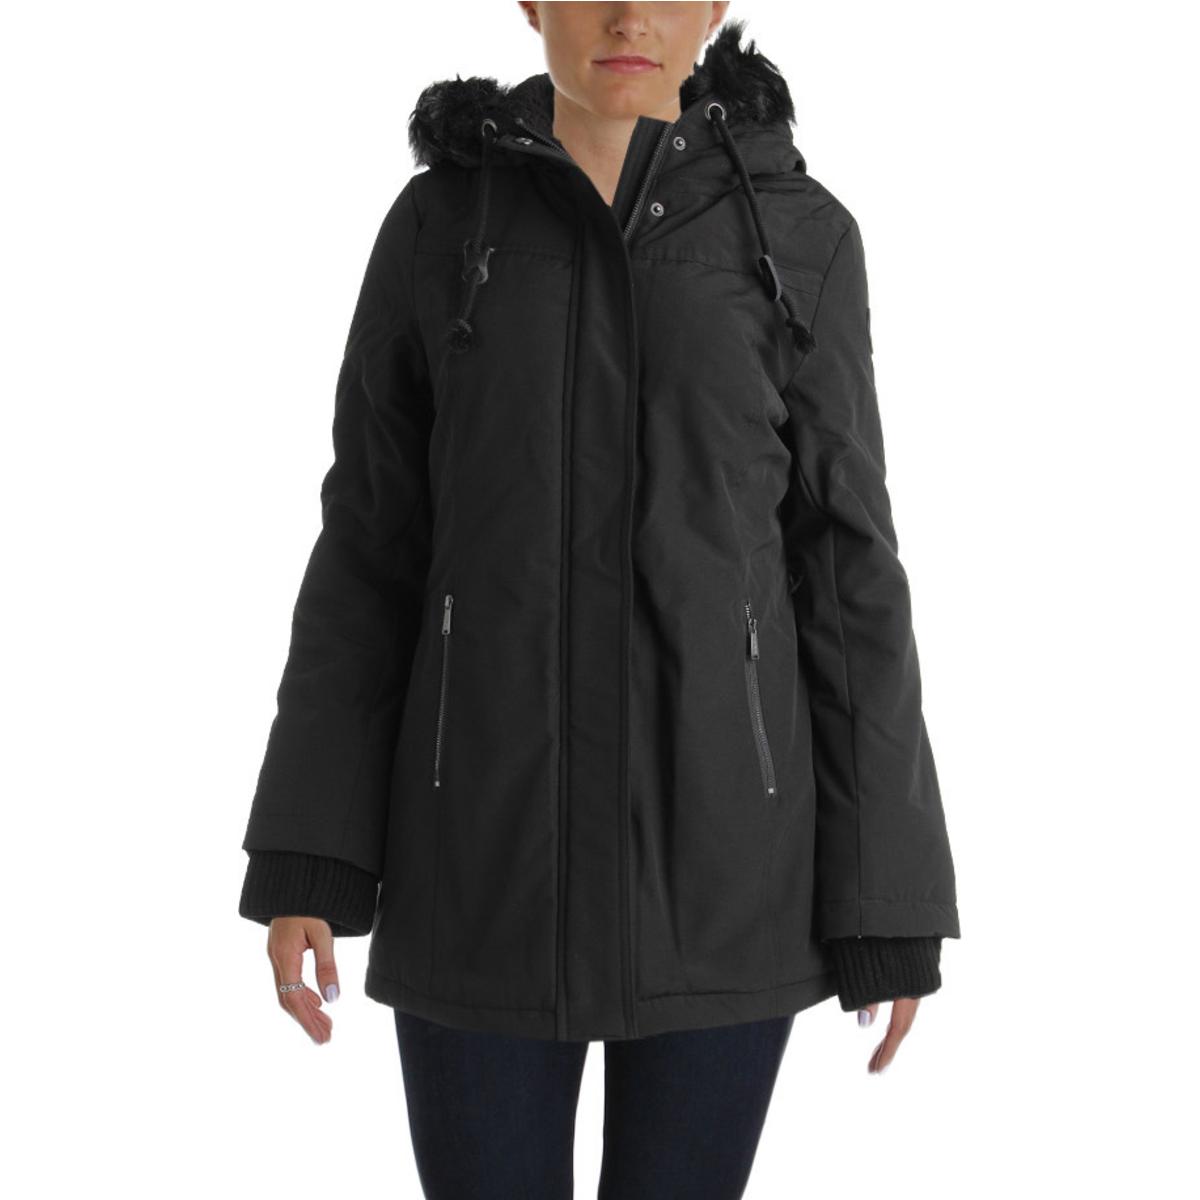 DKNY 5091 Womens Water Resistant Zip Front Hooded Coat Outerwear BHFO ...